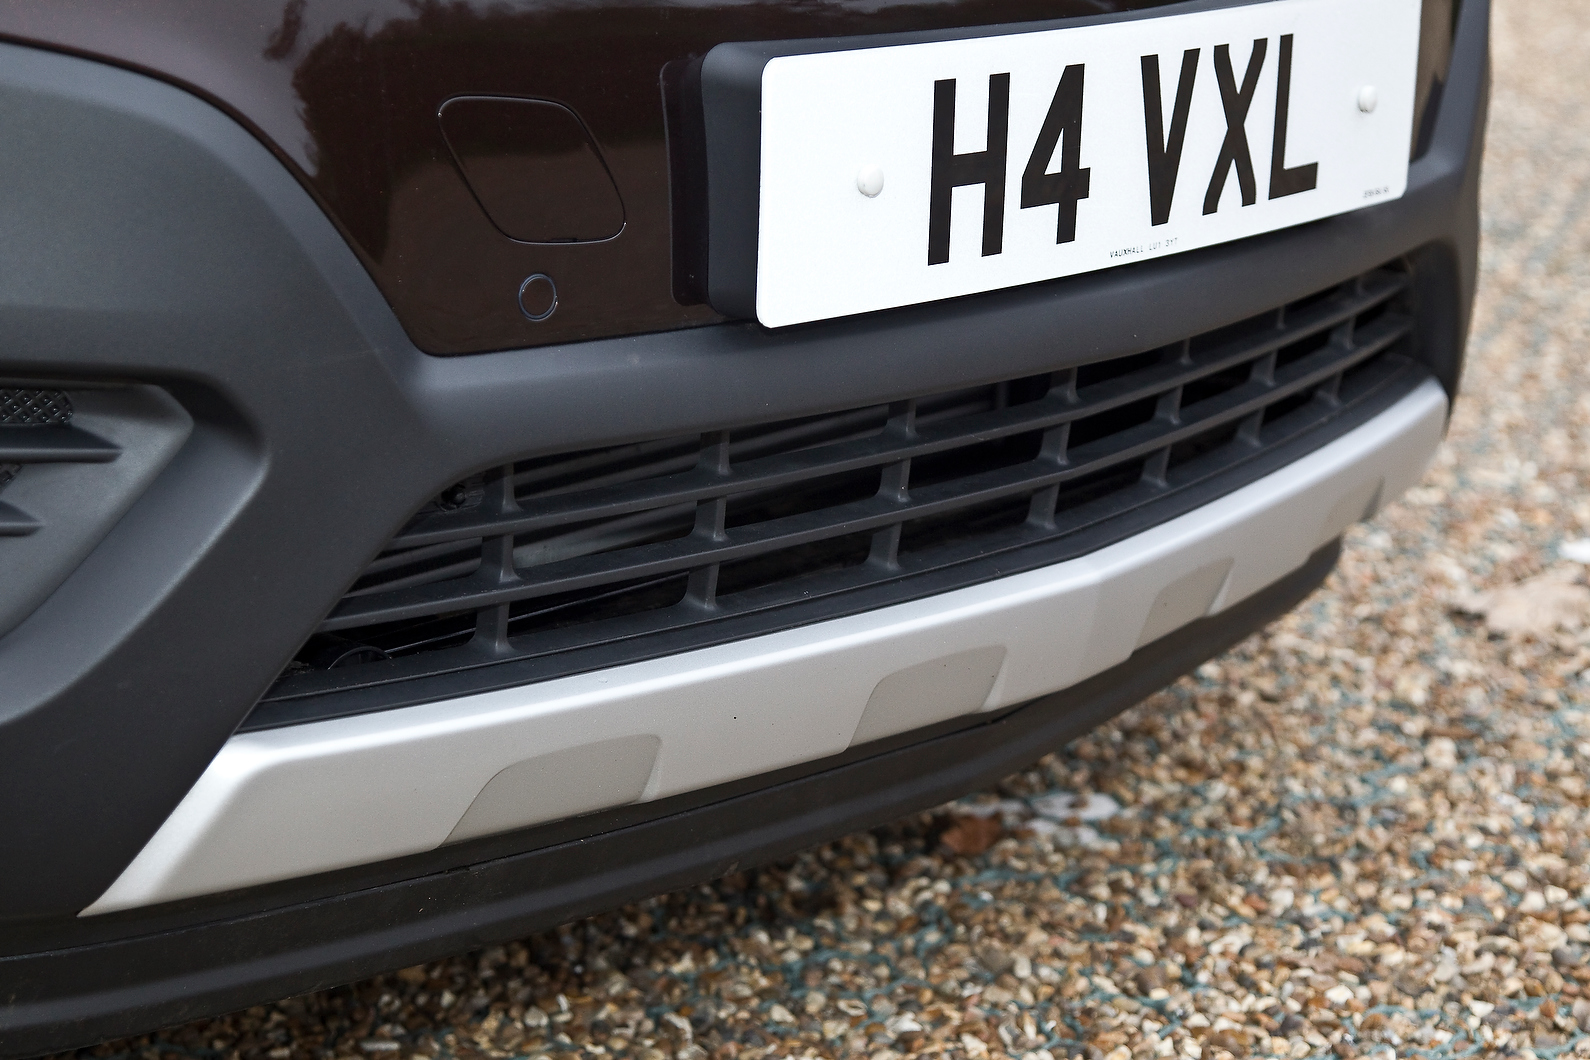 The plastic trim is designed to promote ruggedness on the Vauxhall Mokka